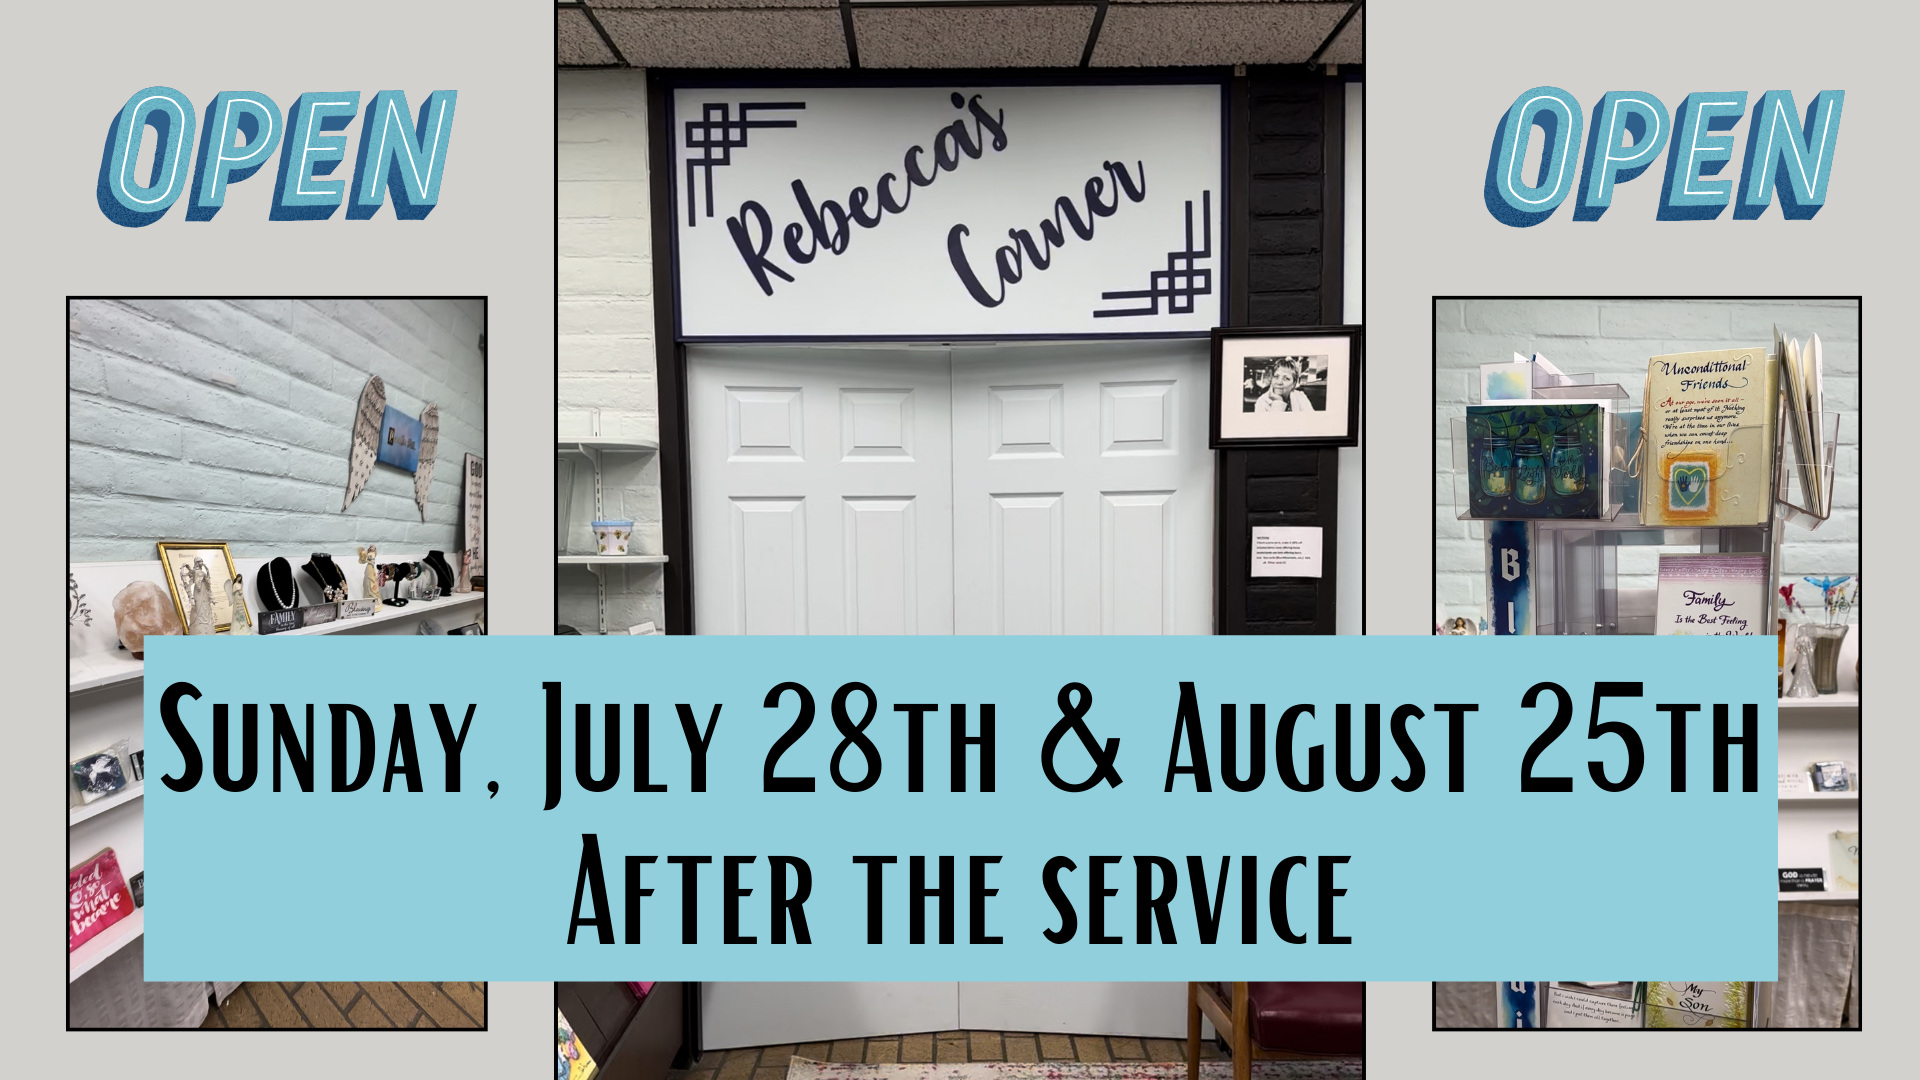  Bookstore Open July 28th & August 25th